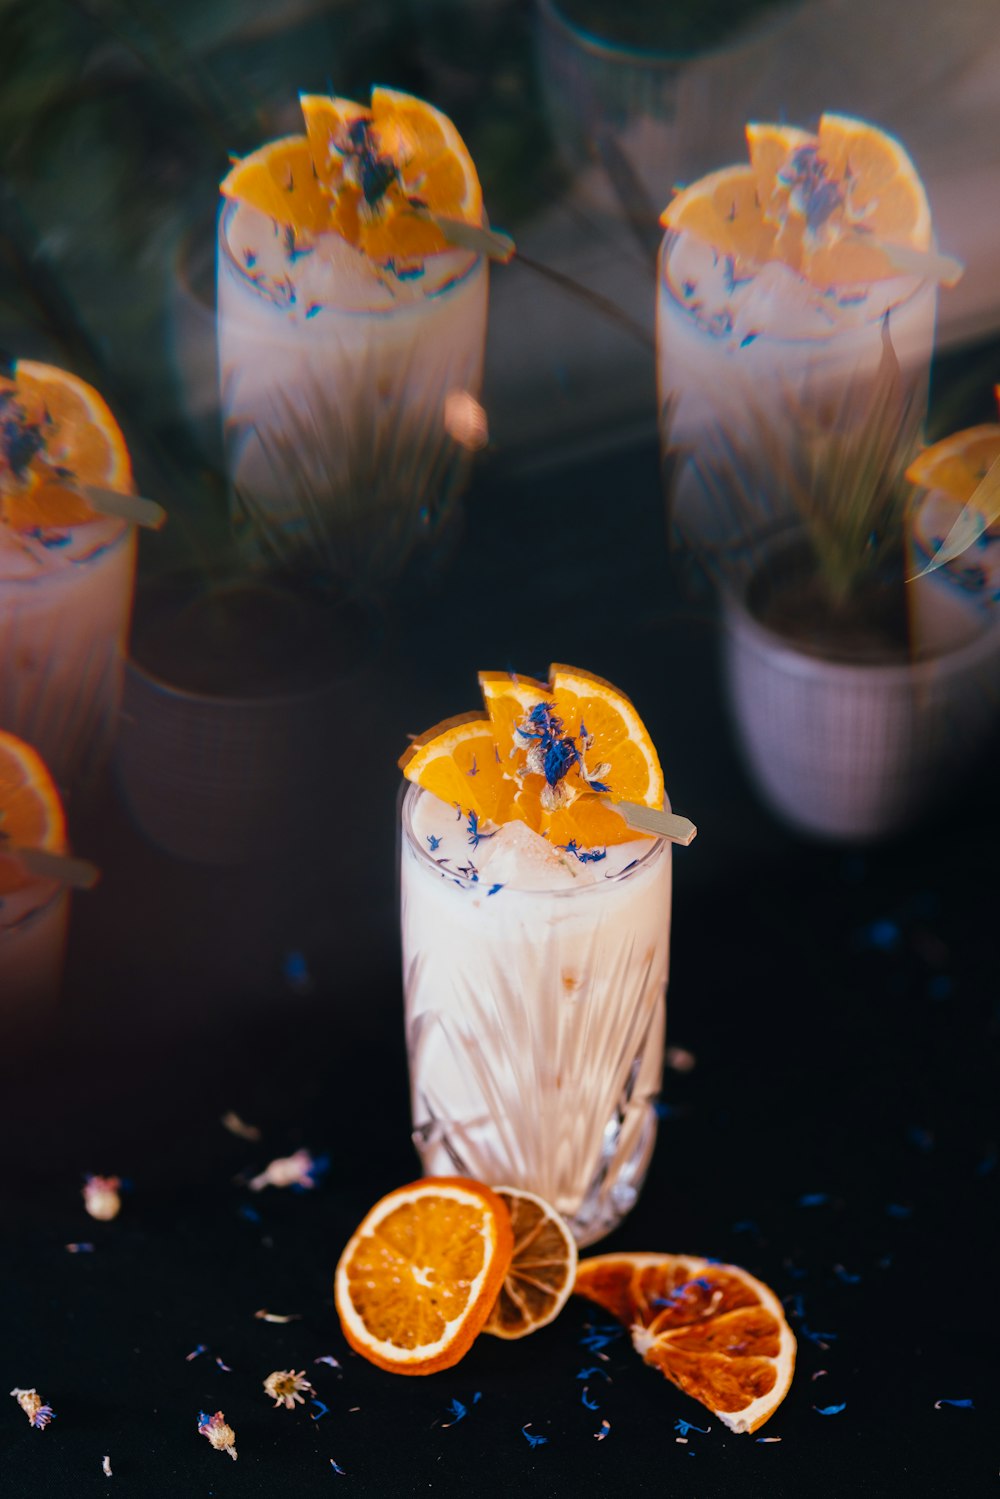 a glass filled with a drink surrounded by orange slices